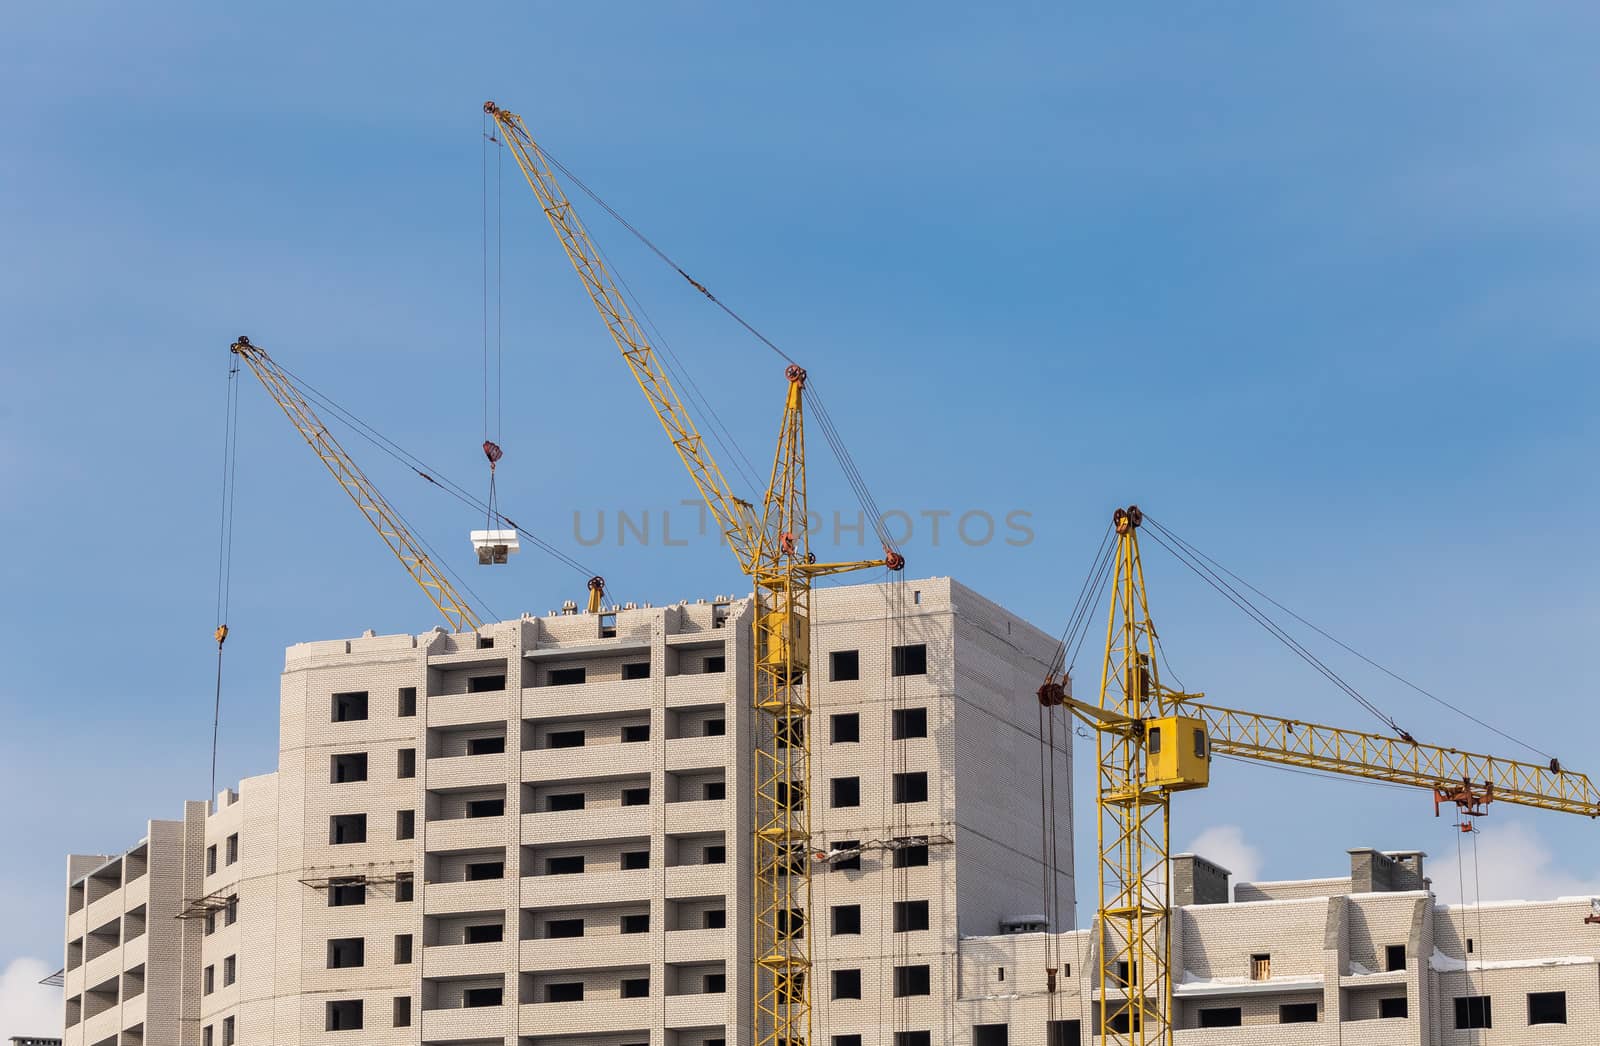 Unfinished apartment buildings. Construction workers laying bricks on top. Special industrial cranes in the middle. Blue sky background